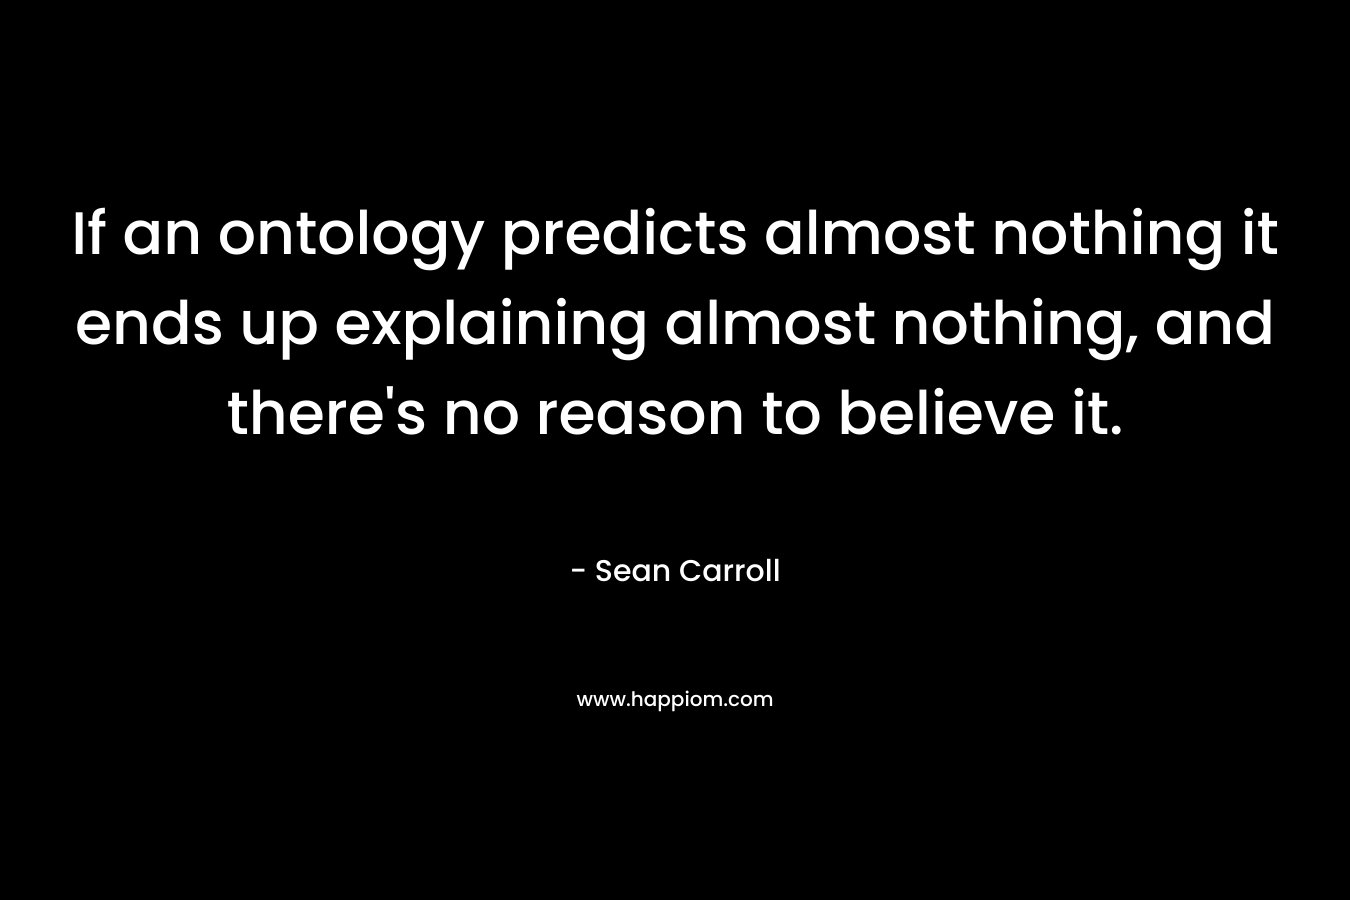 If an ontology predicts almost nothing it ends up explaining almost nothing, and there's no reason to believe it.